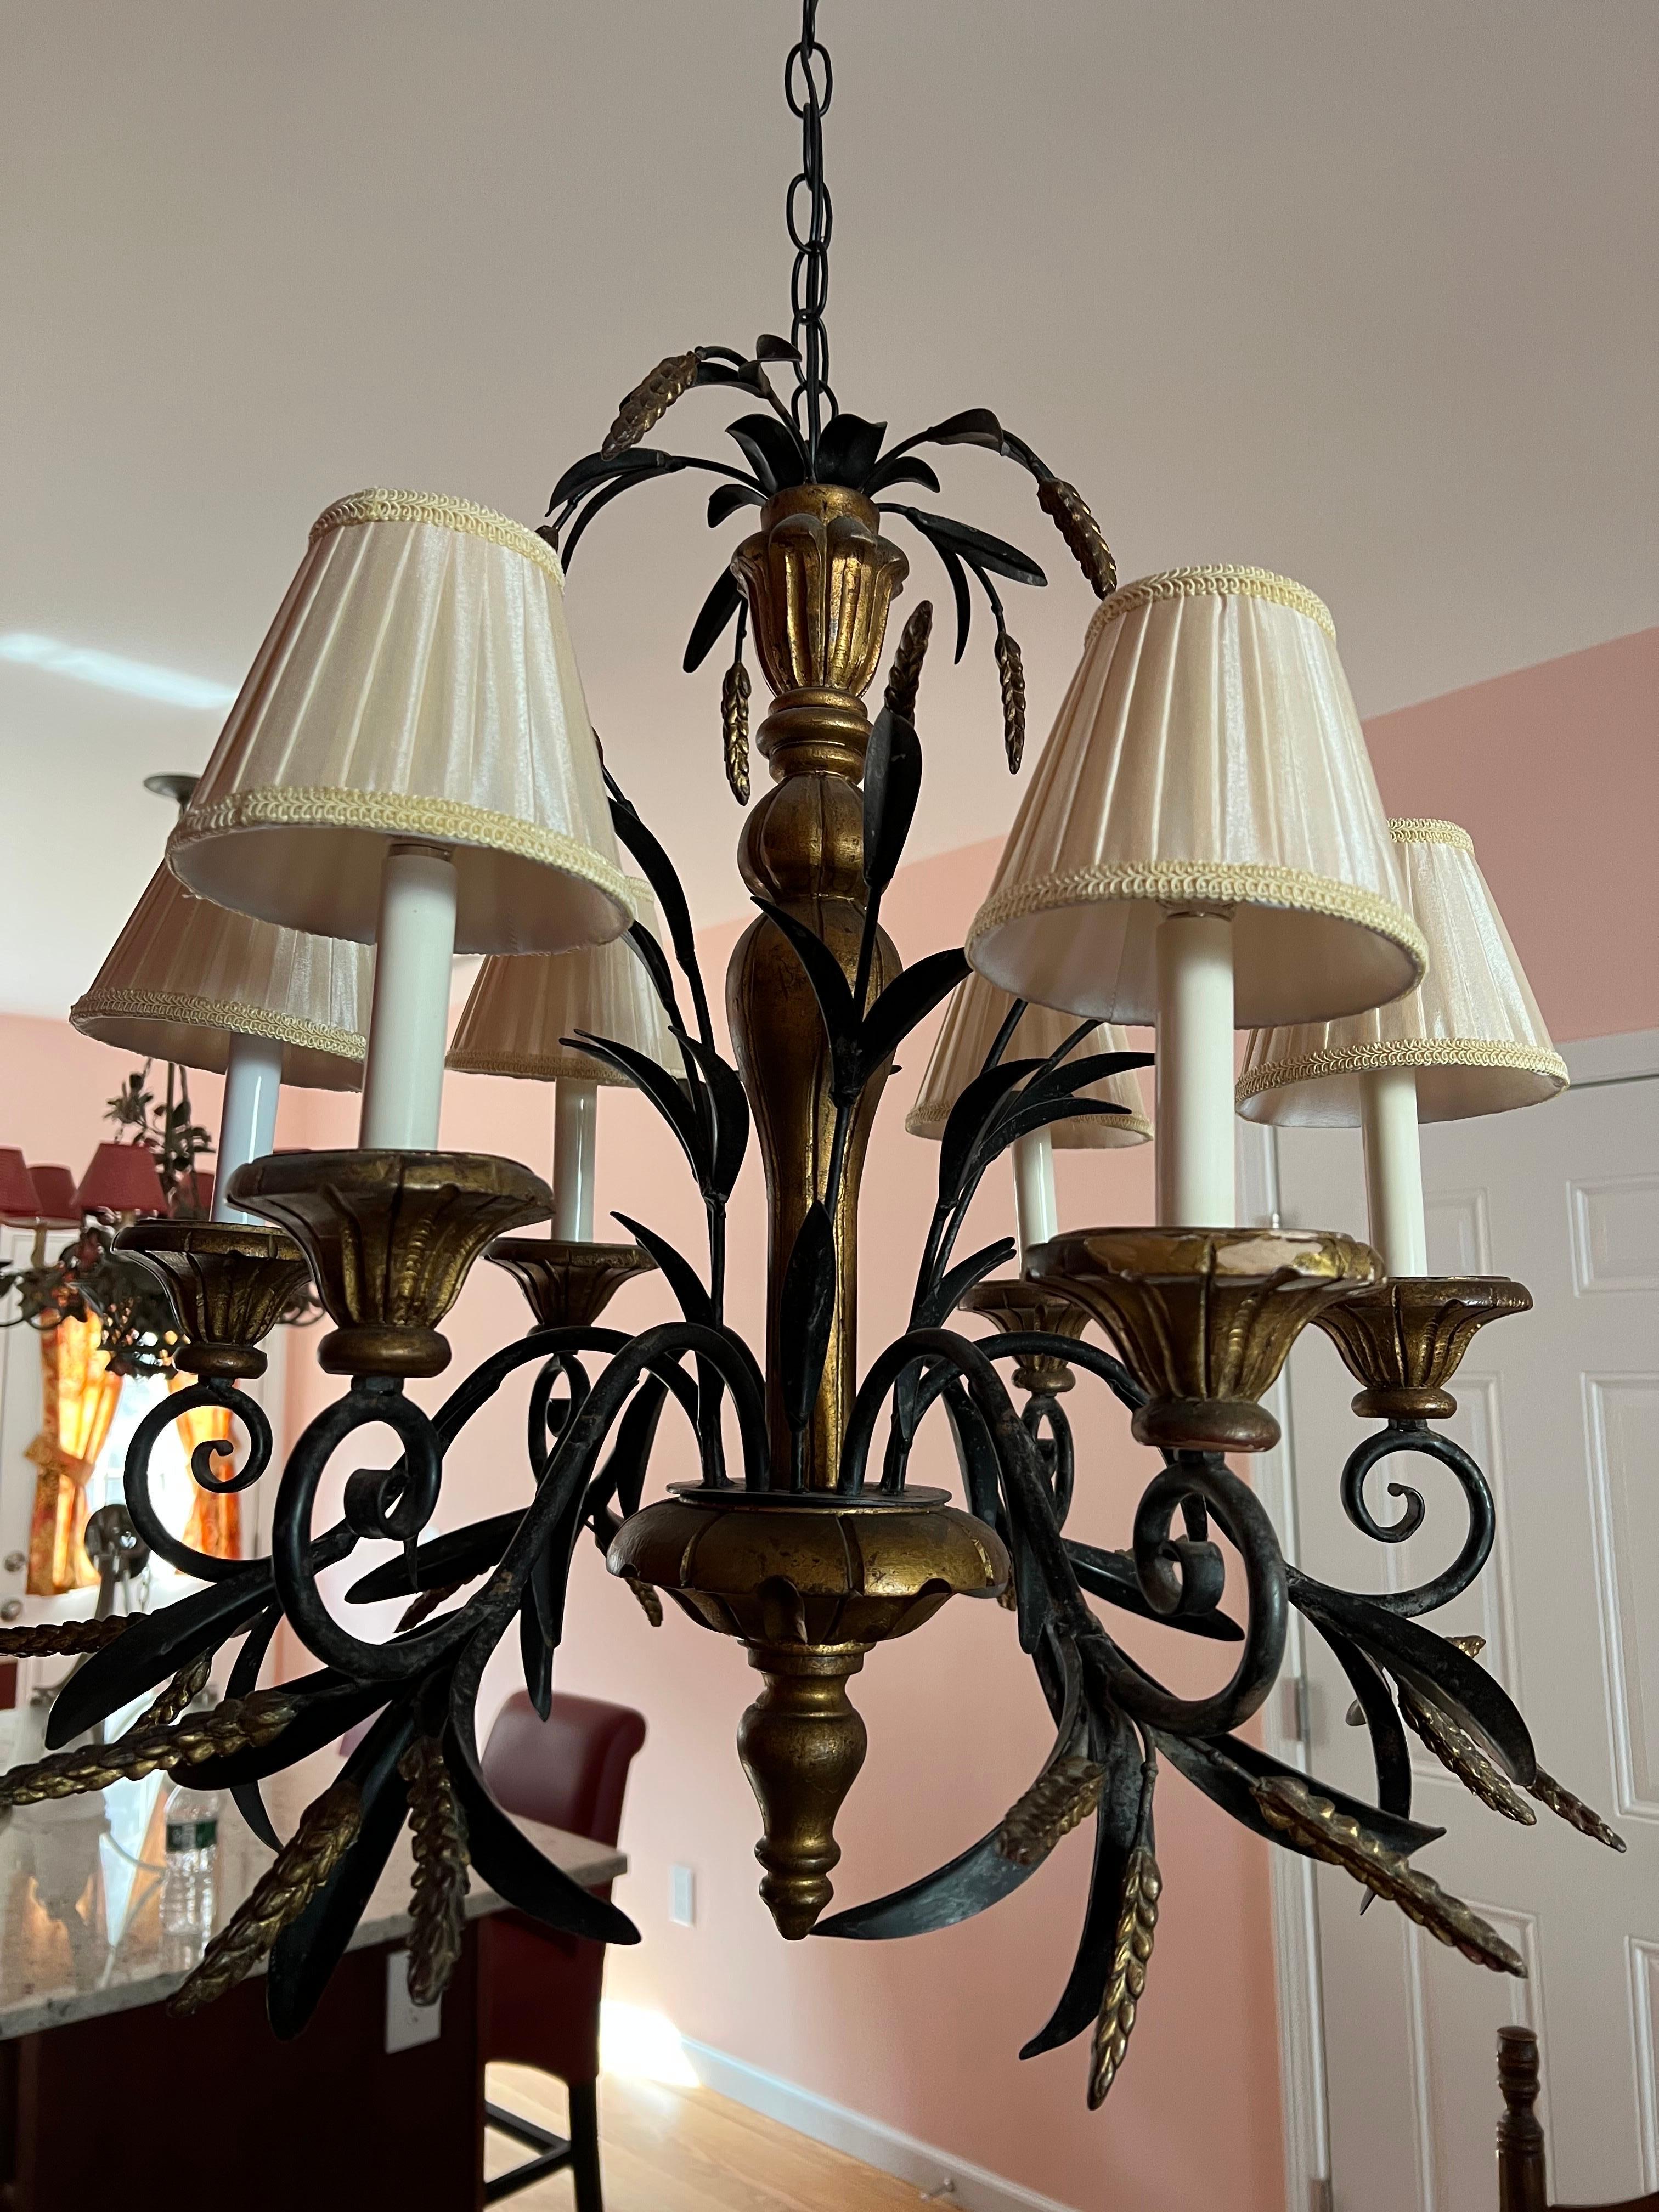  Tole Wheat Sheaf Chandelier in the style of Currey and Company. Painted black tole and wooden gilt design make up this six armed beauty. Soft ivory cloth shades. Elegant and timeless in design. Glamourous Regency Design. This item can most likely